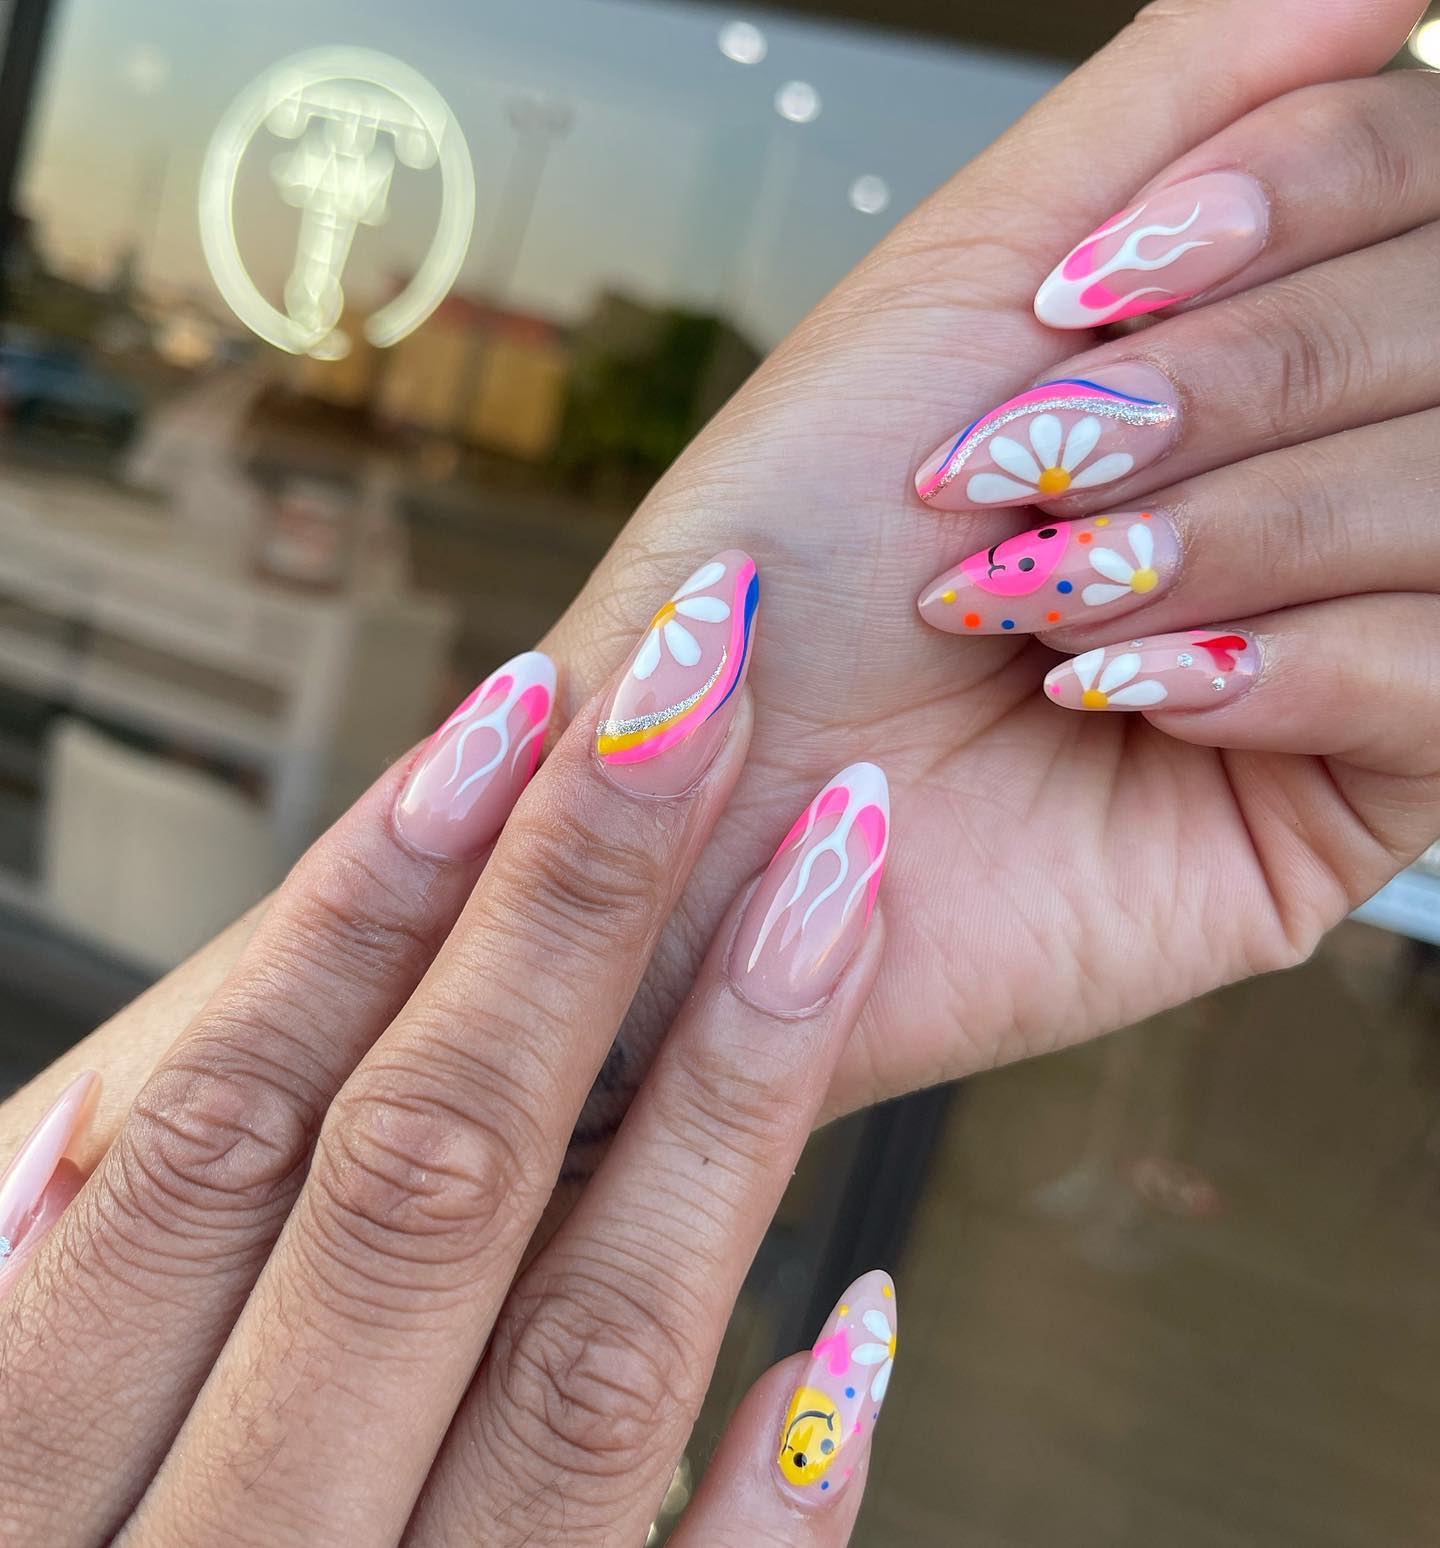 Do you want to try something new? Then, make your manicure appointment immediately and show this nail design to your nail artist!